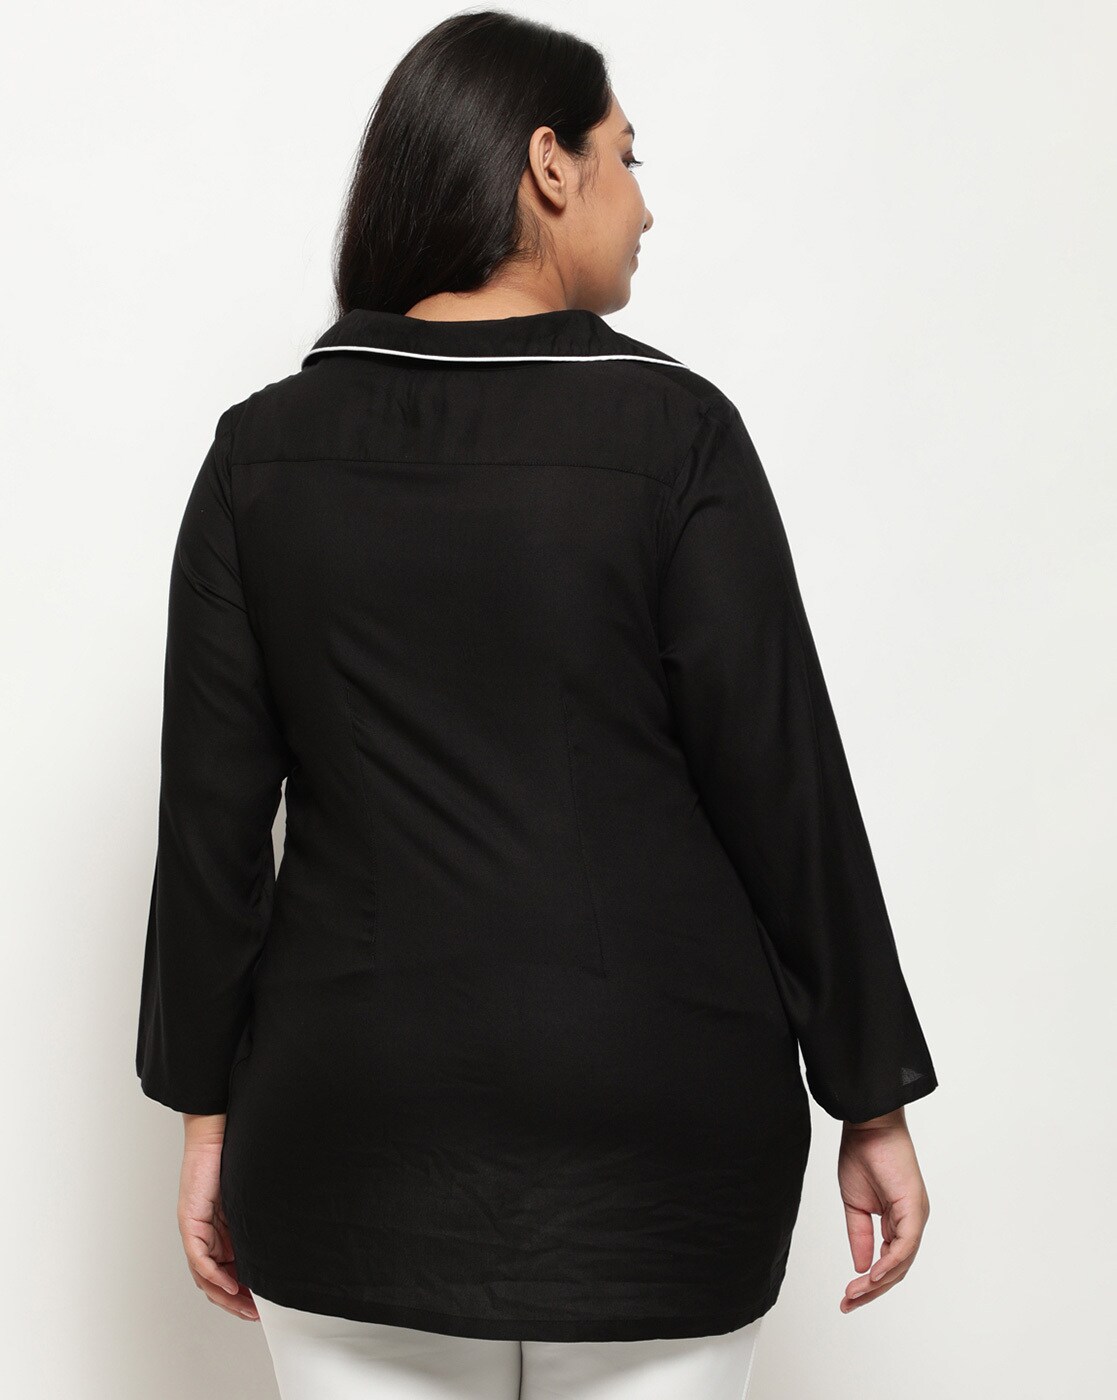 Buy Black Tops for Women by Amydus Online